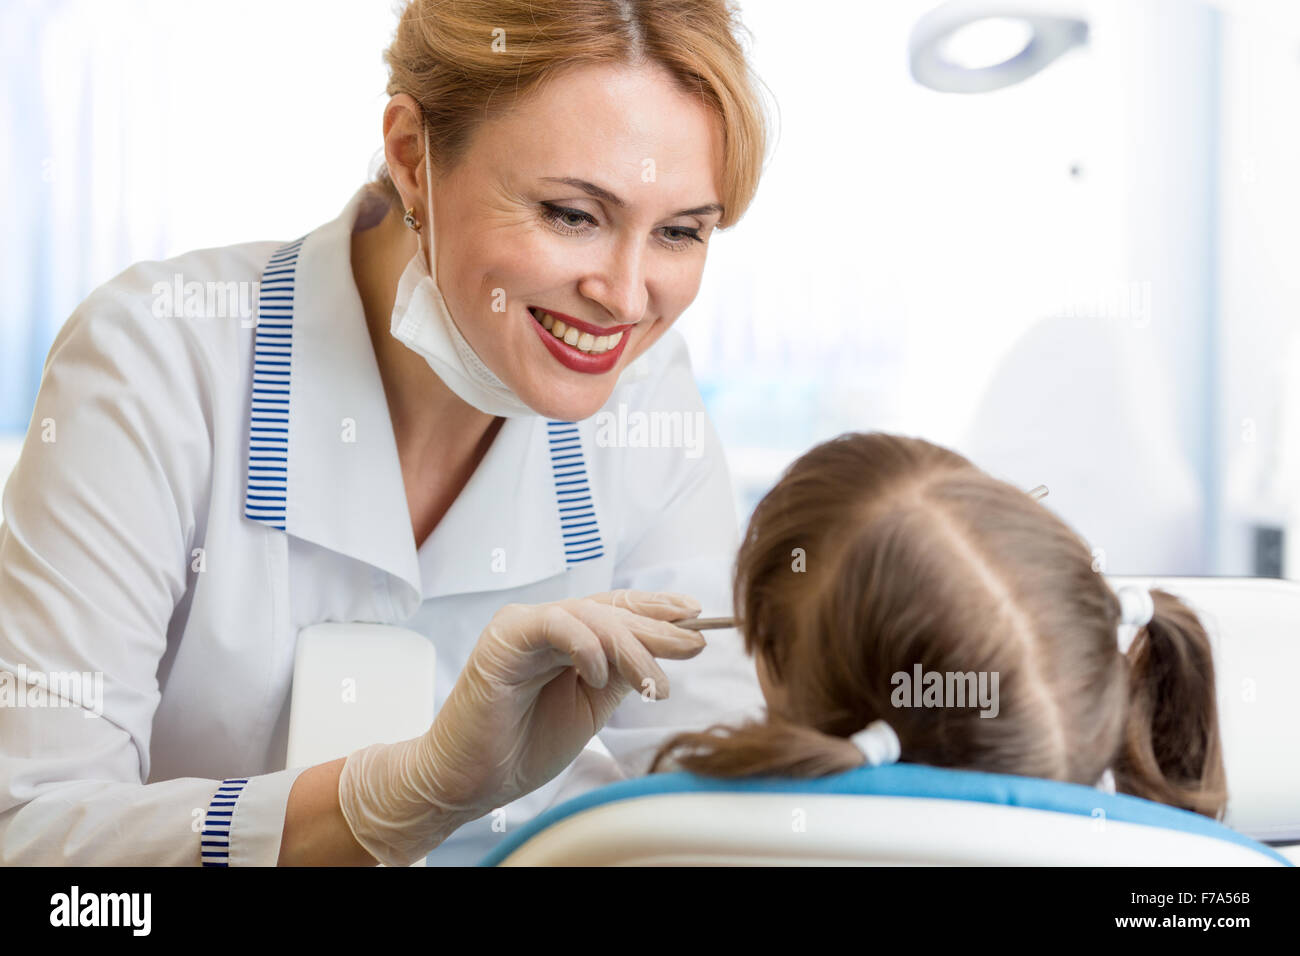 smiling dentist woman examining kid patient in clinic Stock Photo